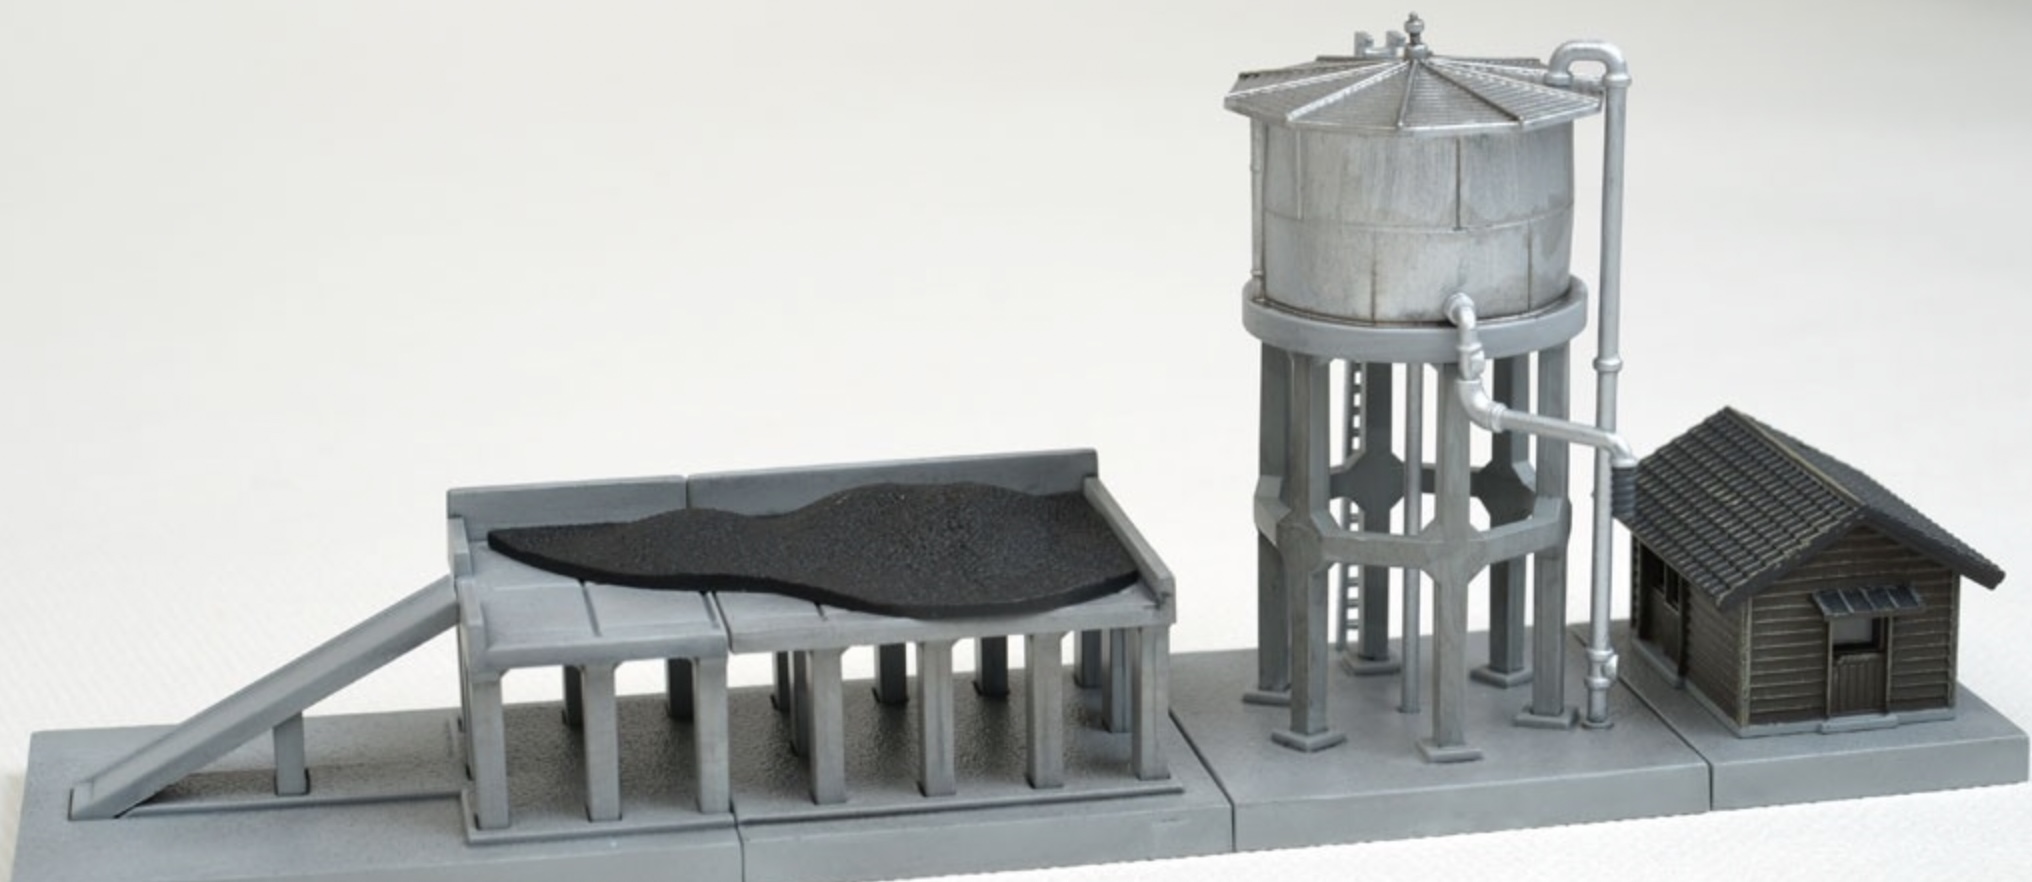 N Scale - Tomytec - 082-2 - Structure, Railroad, Water Tower, Coal Bunker - Railroad Structures